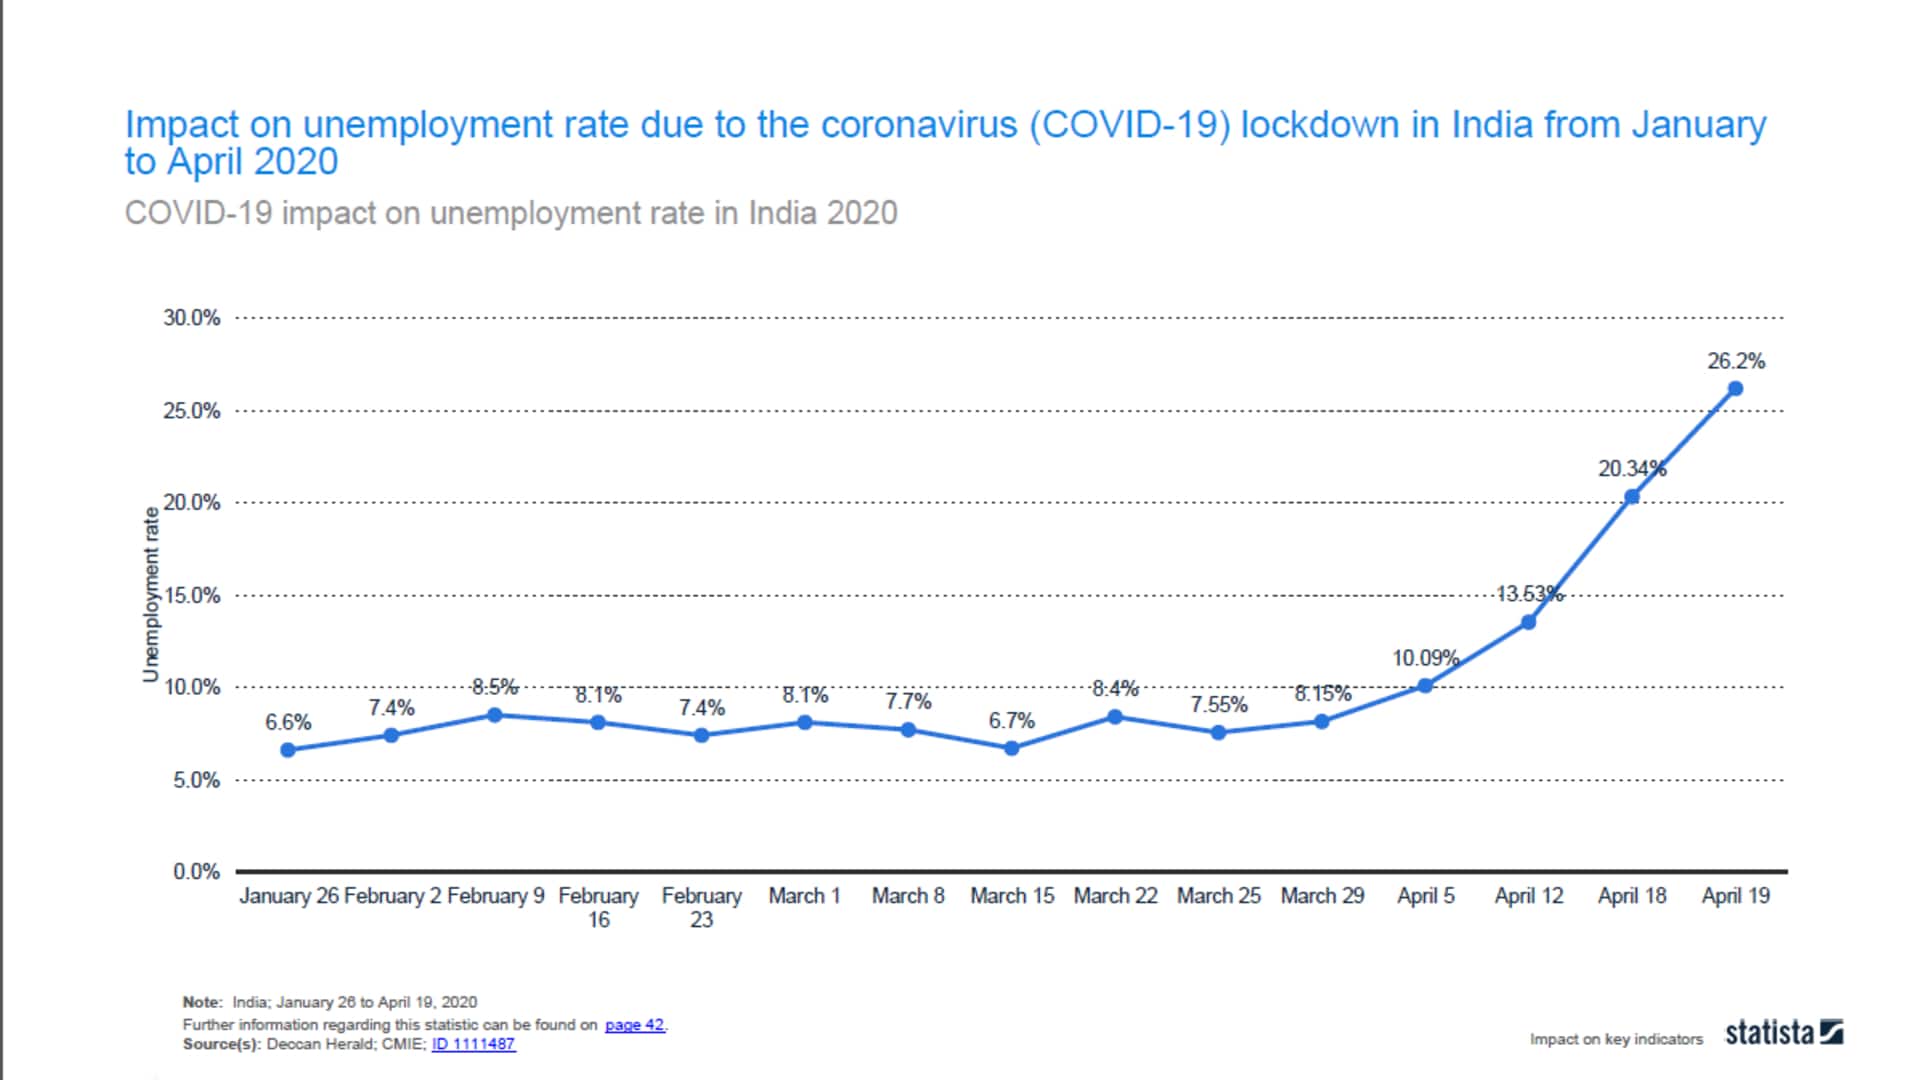 Impact on unemployment rate due to the coronavirus (COVID-19) lockdown in India from January to April 2020: A damaging impact on an economy as large as India`s caused due a total lockdown was imminent. Unemployment went up to 26 percent on April 19, 2020. This was possibly a result of a decrease in demand as well as the disruption of workforce faced by companies. Furthermore, this caused a GVA loss of more than nine percent for the Indian economy that month. The trickle-down effect Between February and April 2020, the share of households that experienced a fall in income shot up to nearly 46 percent. Inflation rates on goods and services including food products and fuel were expected to rise later this year. Social distancing resulted in the job losses, specifically those Indian society`s lower economic strata. Several households terminated domestic help services - essentially an unorganized monthly-paying job. Most Indians spent a large amount of time engaging in household chores themselves, making it the most widely practiced lockdown activity. Aid from the Pradhan Mantri Garib Kalyan Yojana The most devastating impact of the virus and the lockdown had been on the economically backward classes, with limited access to proper healthcare and other resources. This resulted in the government having launched various programs and campaigns to help sustain these households. Under the Pradhan Mantri Garib Kalyan Yojana, 312 billion Indian rupees were accrued and provided to around 331 million beneficiaries that included women, construction workers, farmers, and senior citizens. More aid was announced in mid-May, to mainly support small businesses through the crisis. (Graph: CRISIL)